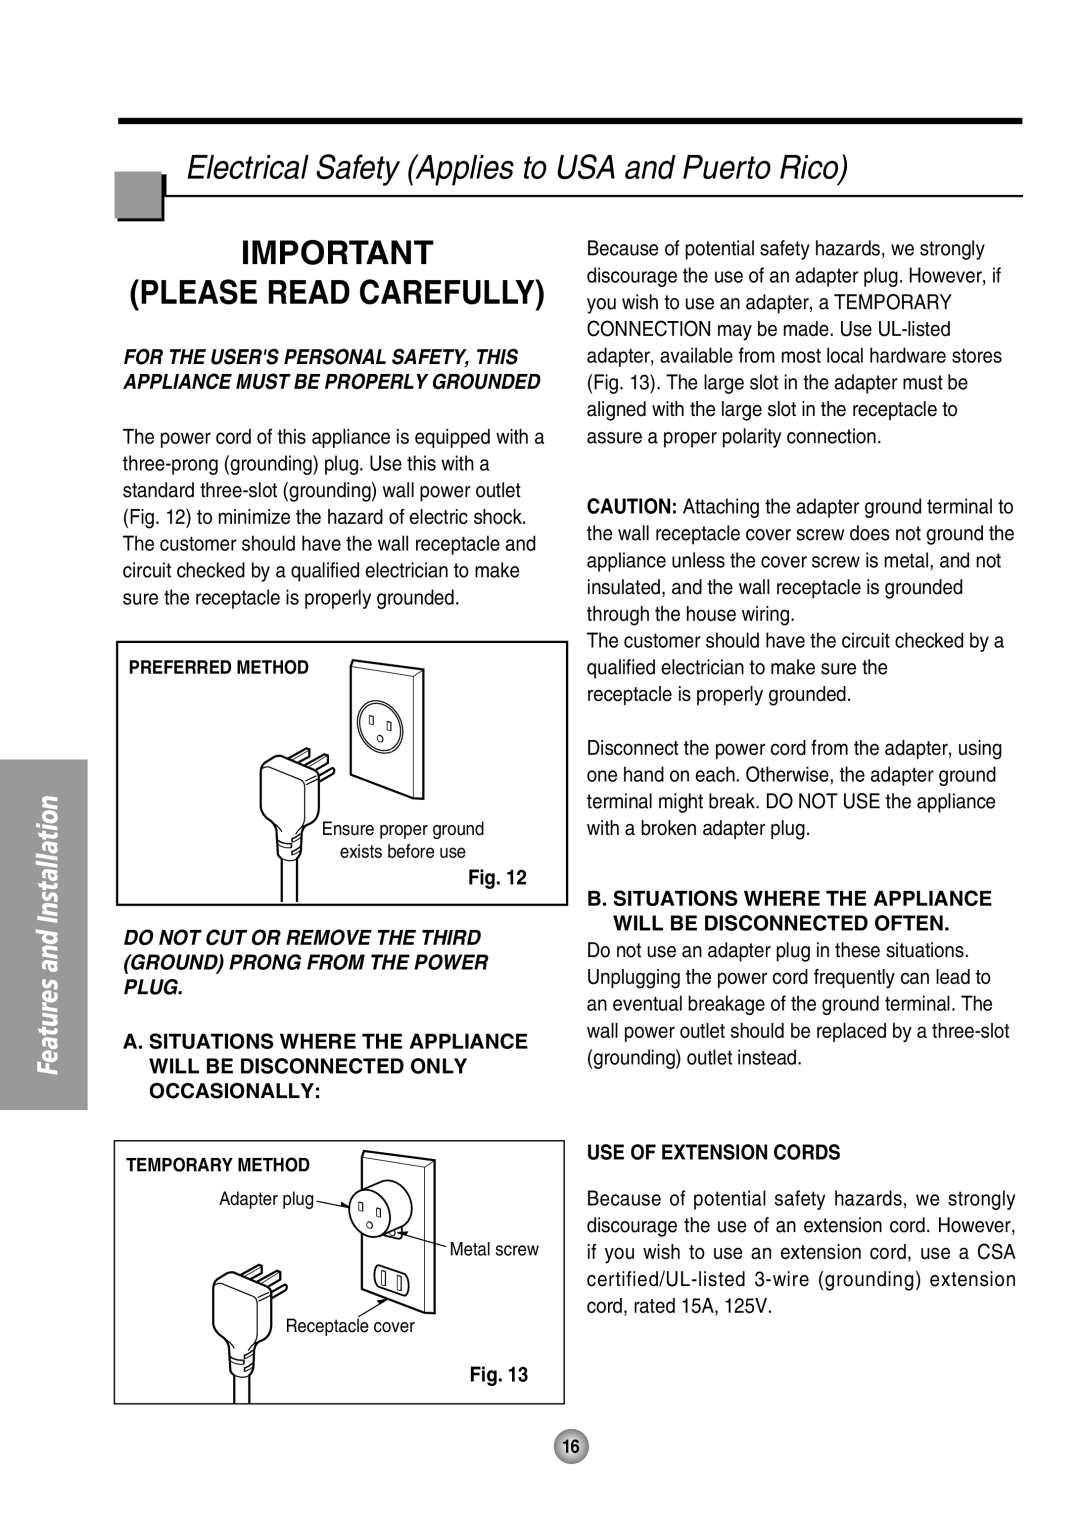 Panasonic CW-XC64HU Electrical Safety Applies to USA and Puerto Rico, Please Read Carefully, Use Of Extension Cords, Fig 